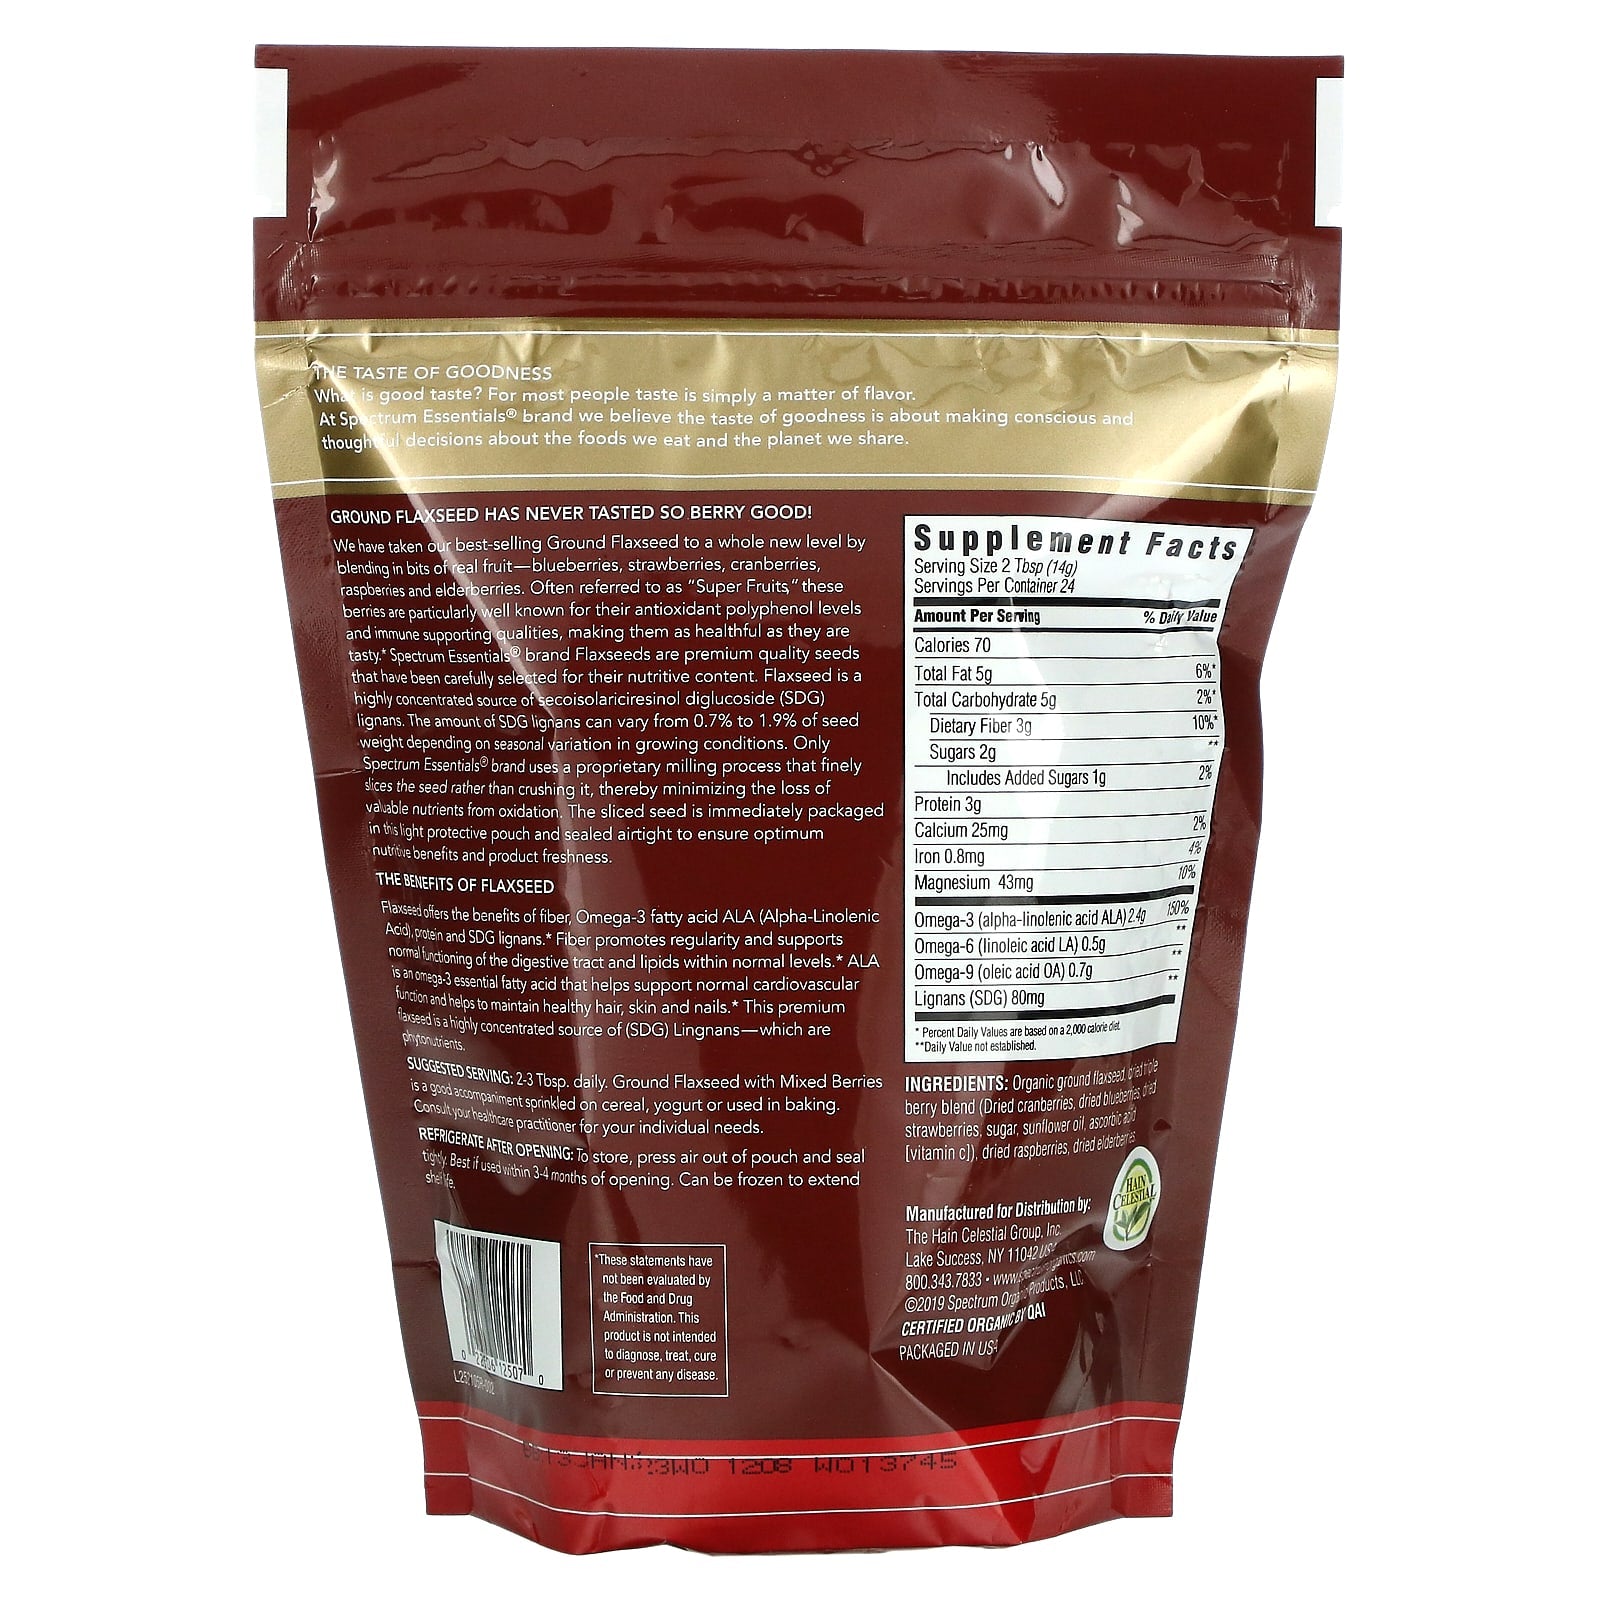 *FREE* Spectrum Essentials, Ground Flaxseed with Mixed Berries, 12 oz (340 g)